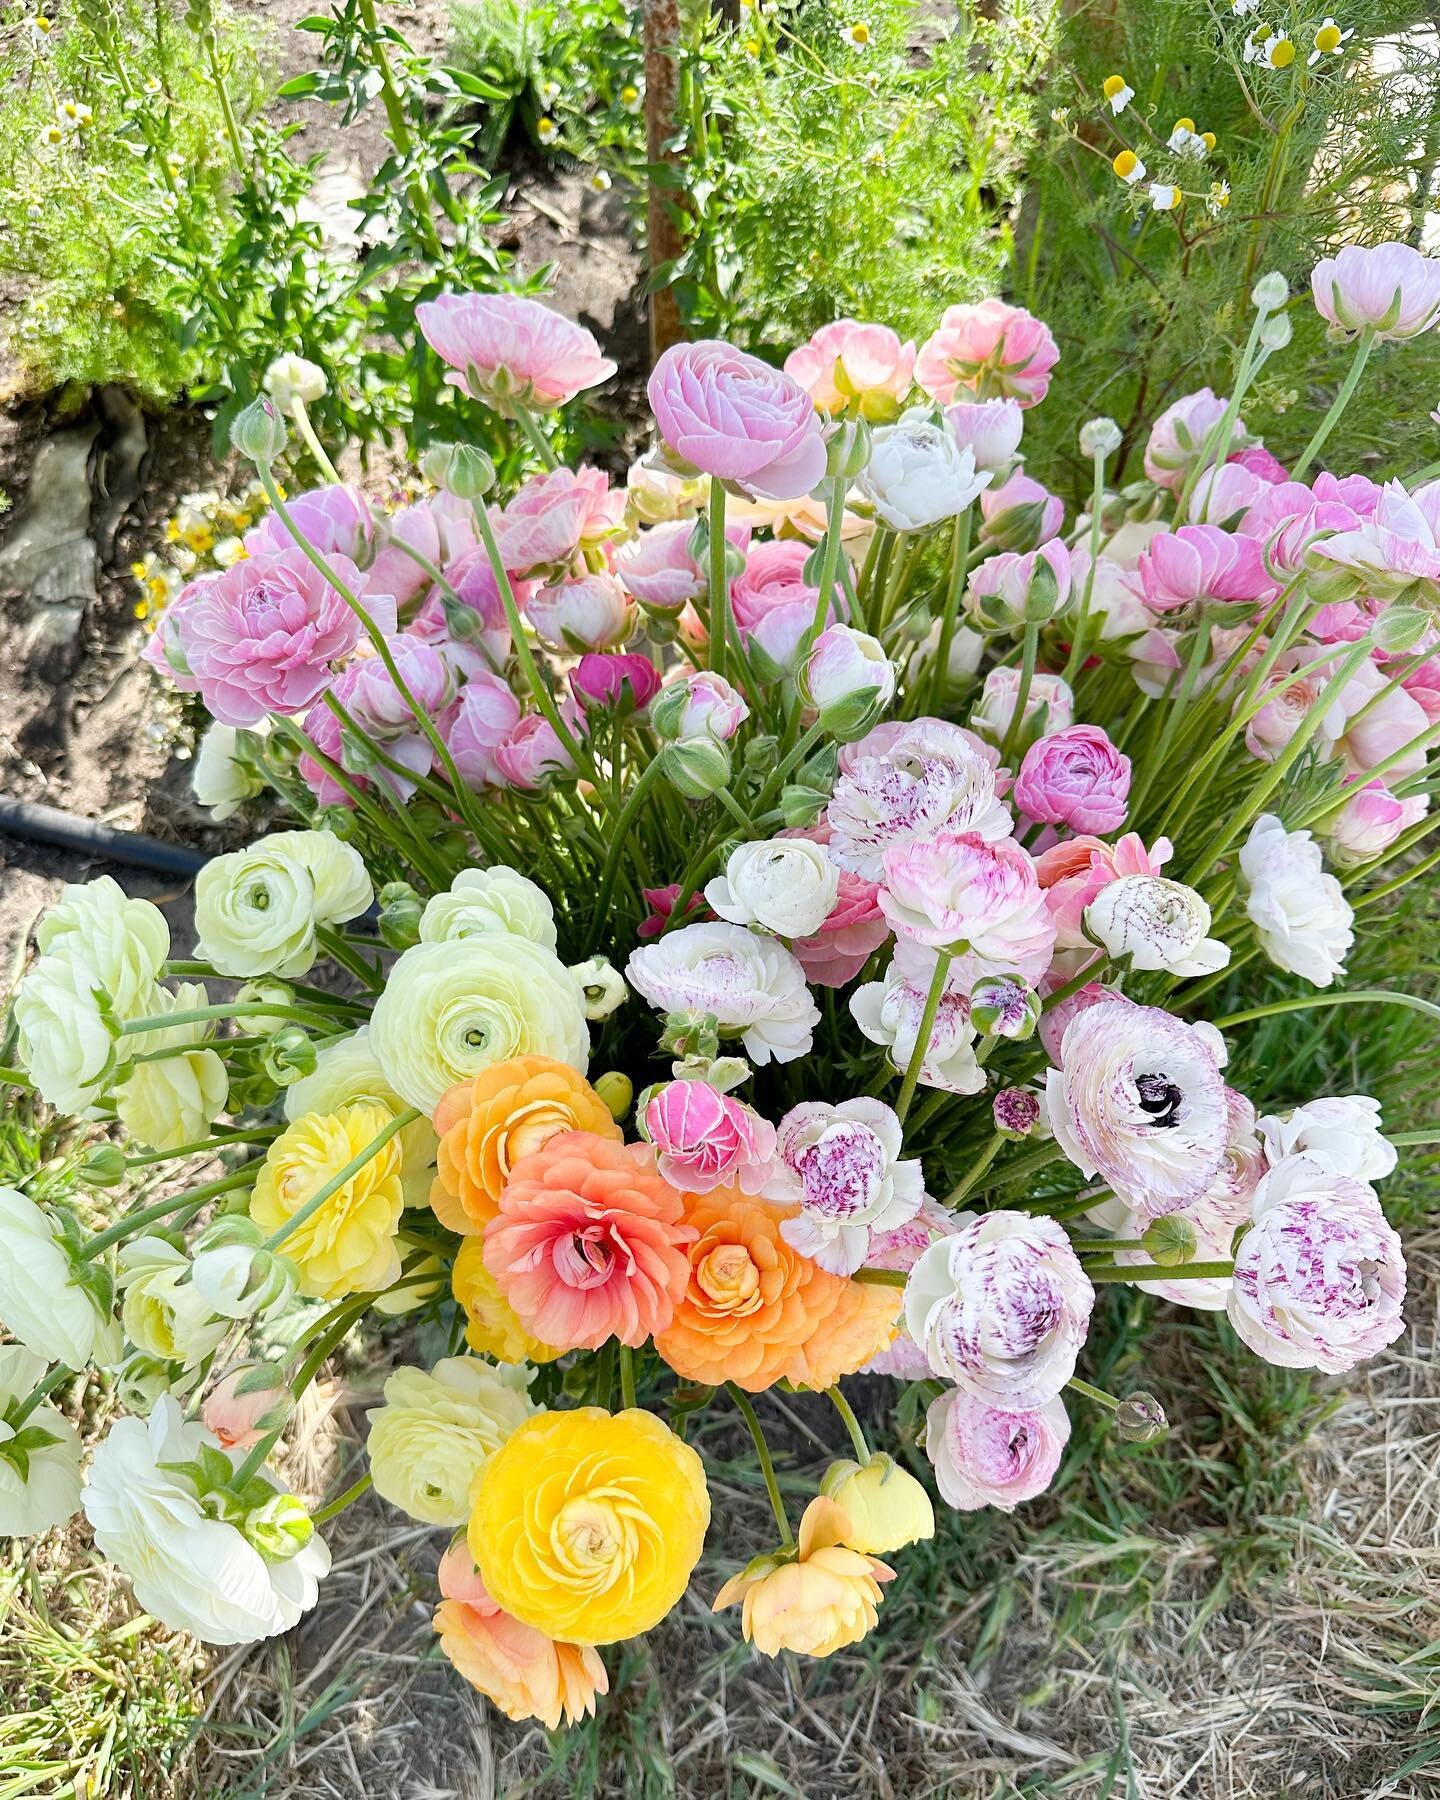 My last bucket of ranunculus has been harvested and I thought it only fare it get a reserved spot on the feed. A happy ending to a beautiful season of these beauties ! Although I did get a little tired keeping up with these prolific bloomers, they wi